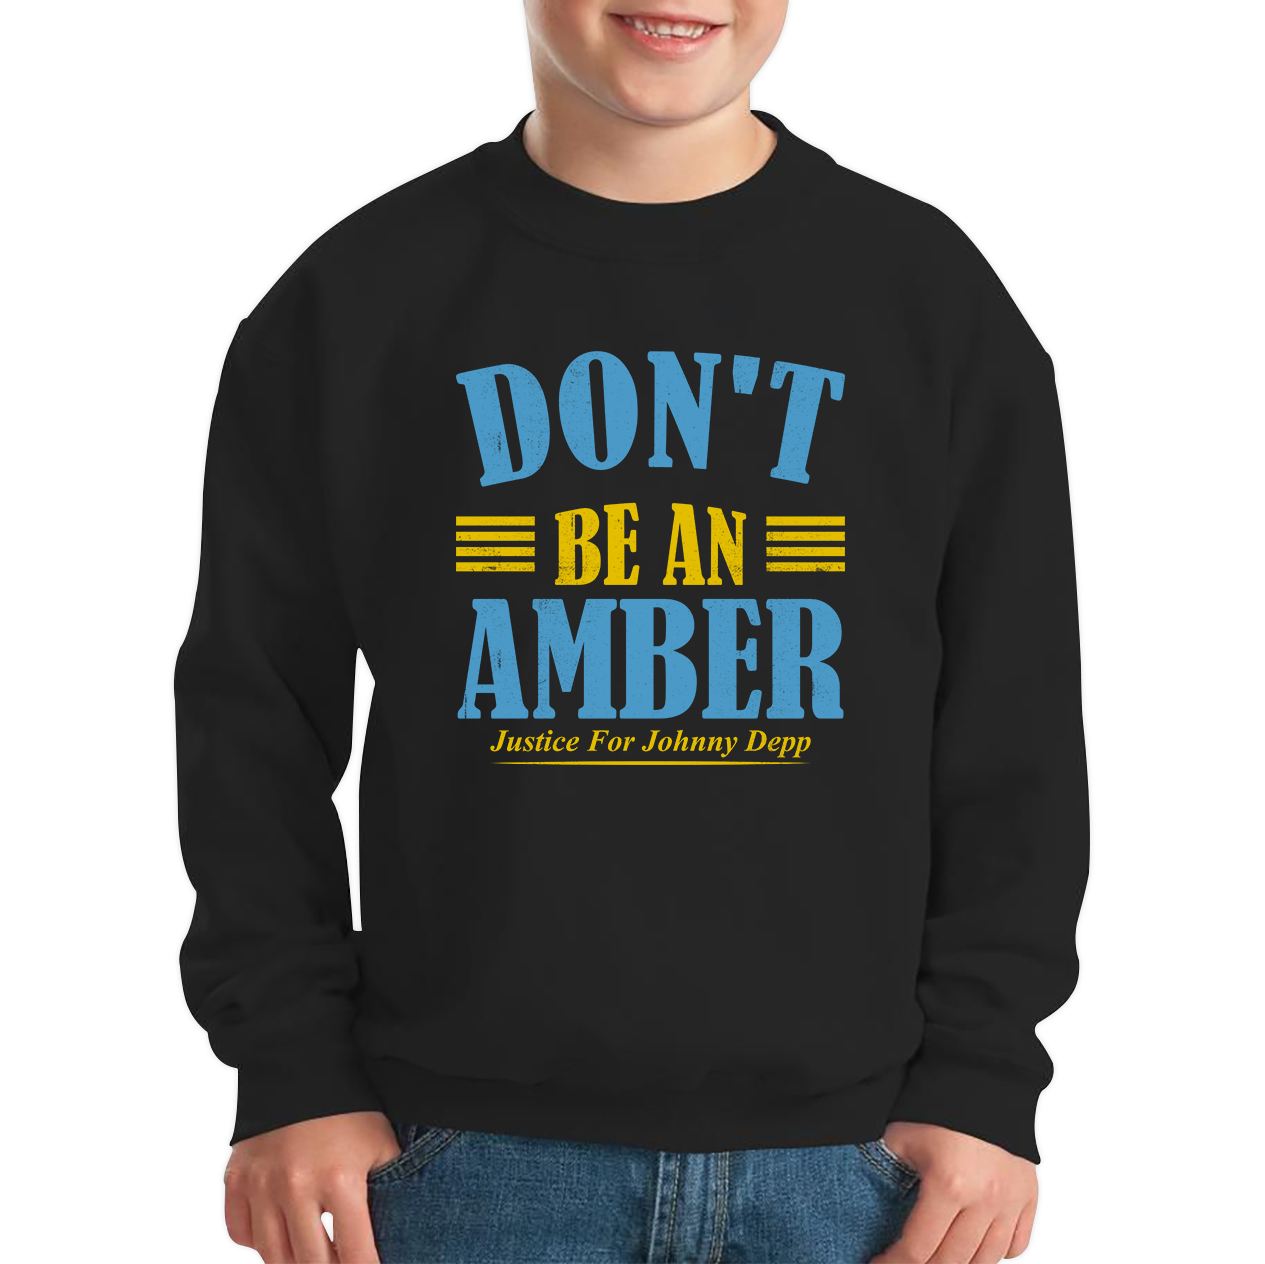 Don't Be An Amber Justice For Johnny Depp Jumper Stand With Johnny Depp Kids Sweatshirt